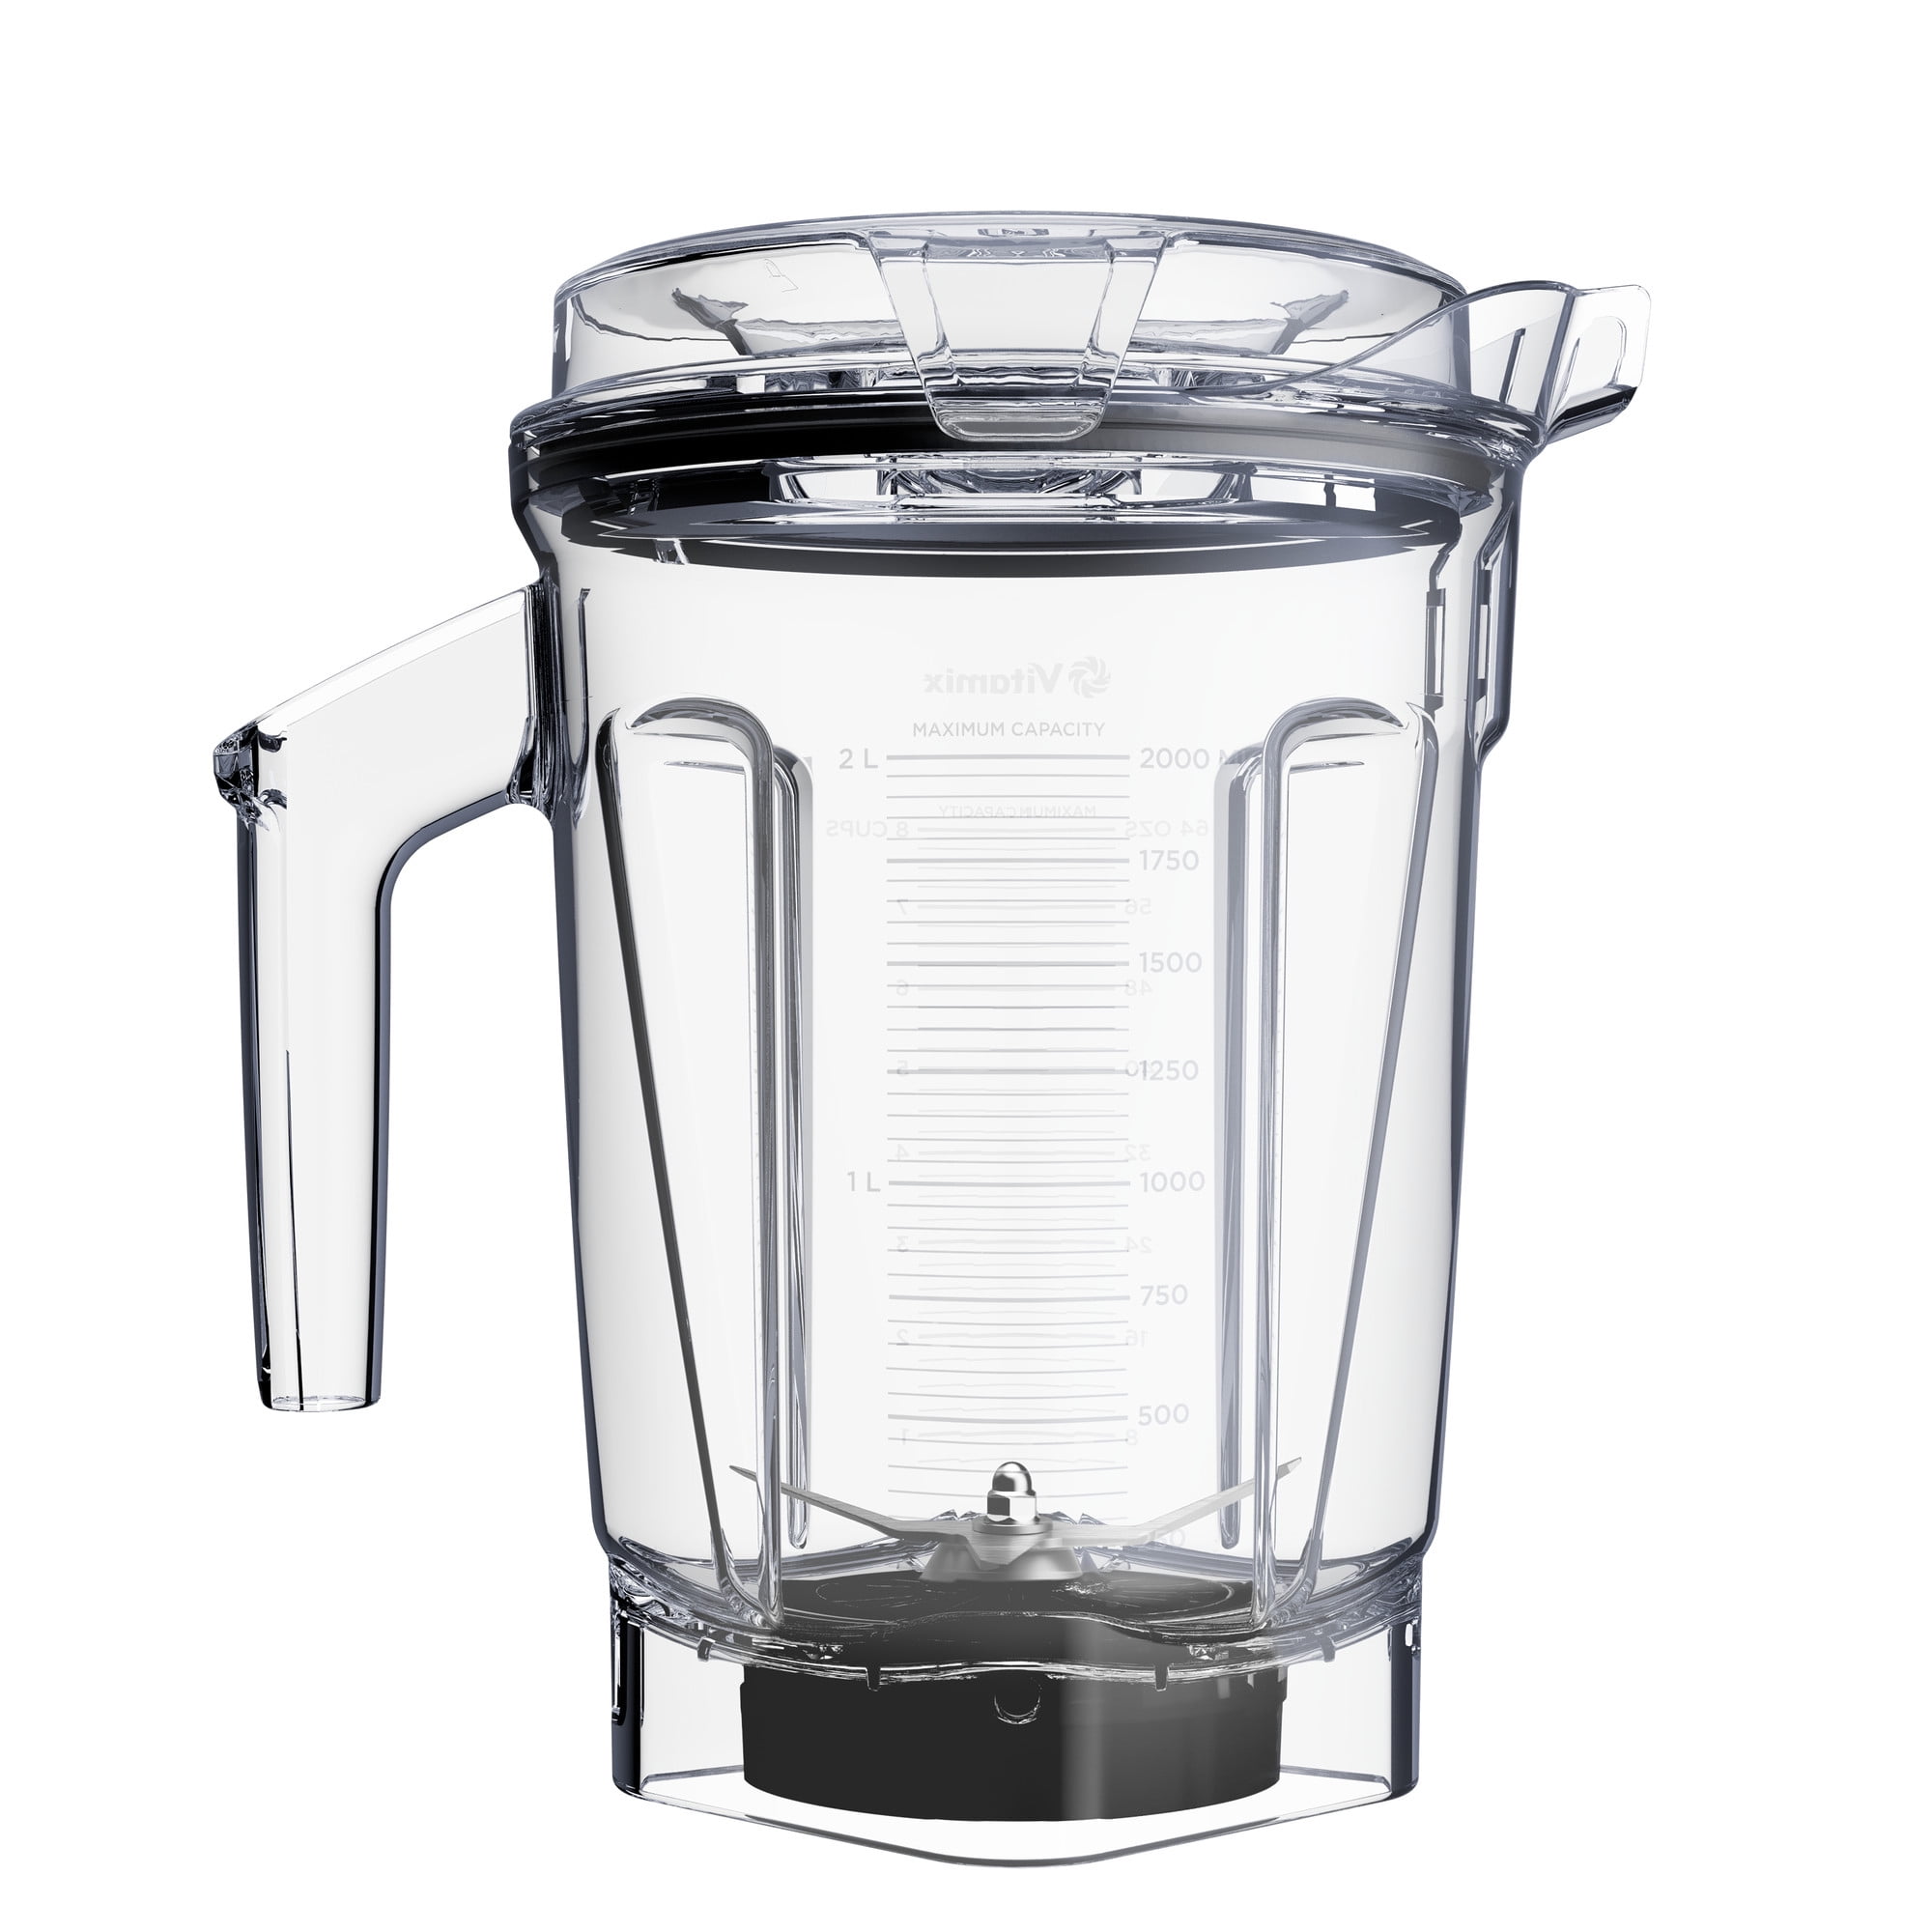 Vitamix A3500i Ascent Series Smart Blender- Brushed Stainless Finish –  Cookerlicious